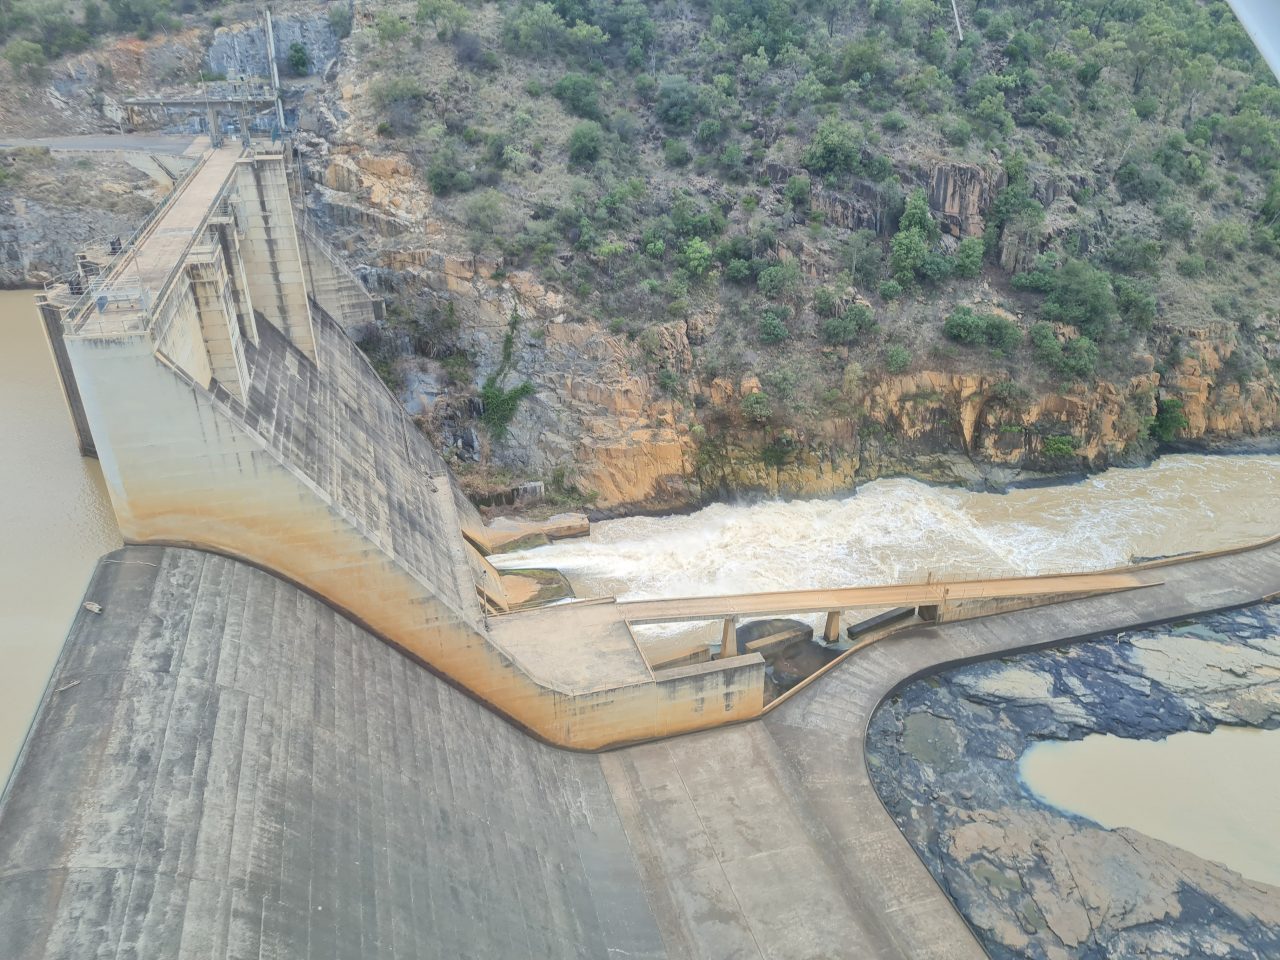 Aerial photo of  dam on river, with a flow of yellow-brown water being released